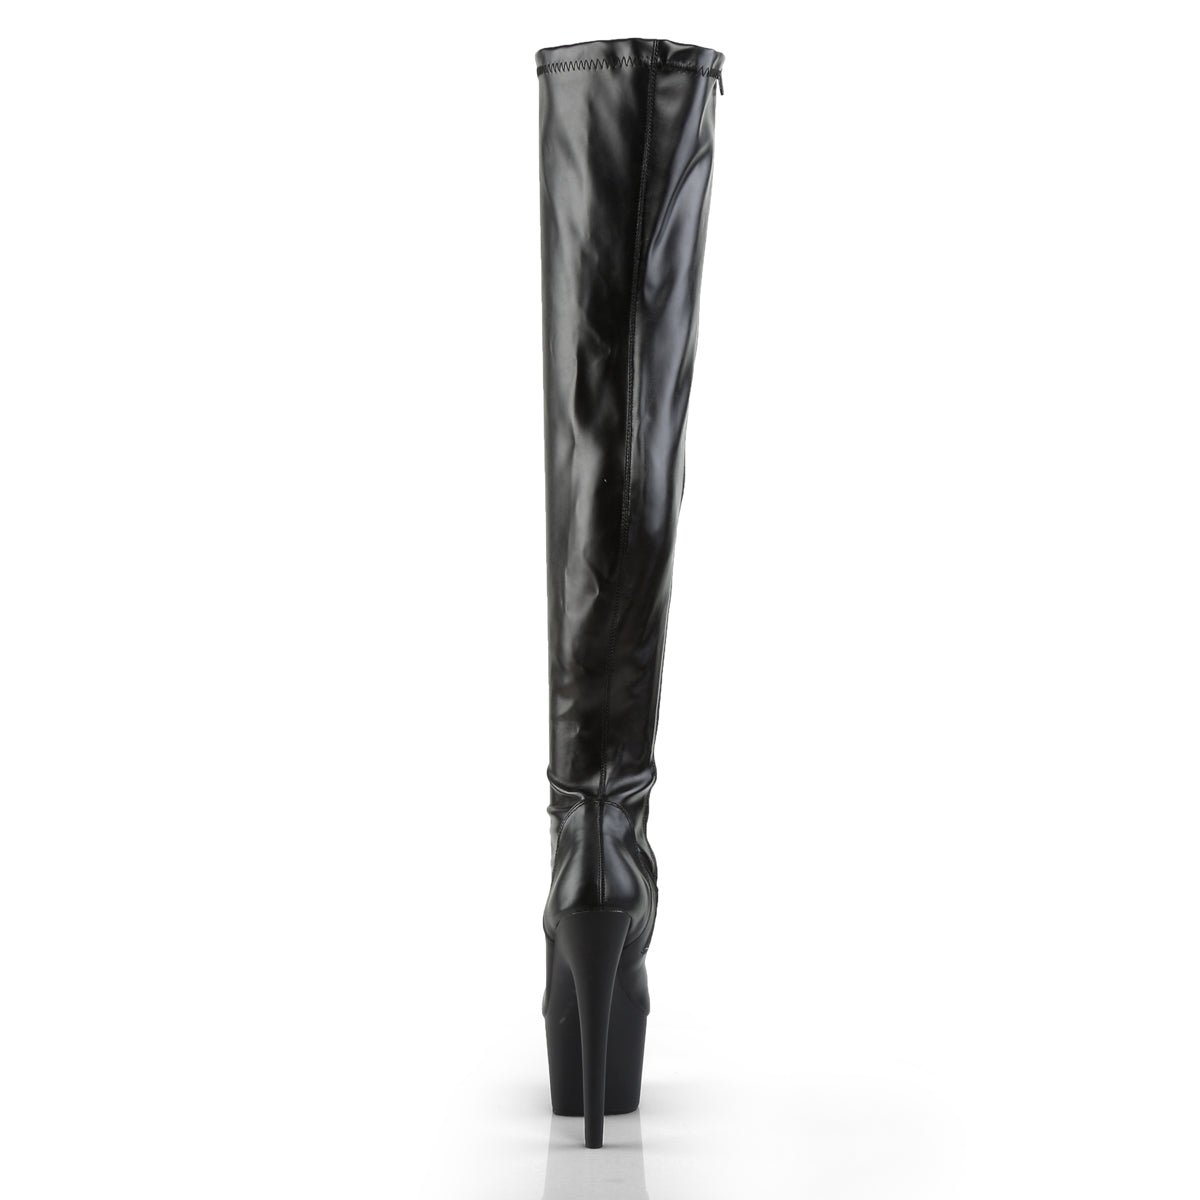 ADORE-3000 / B / PU 7 "PLEASER FAST DELIVERY 24-48h 